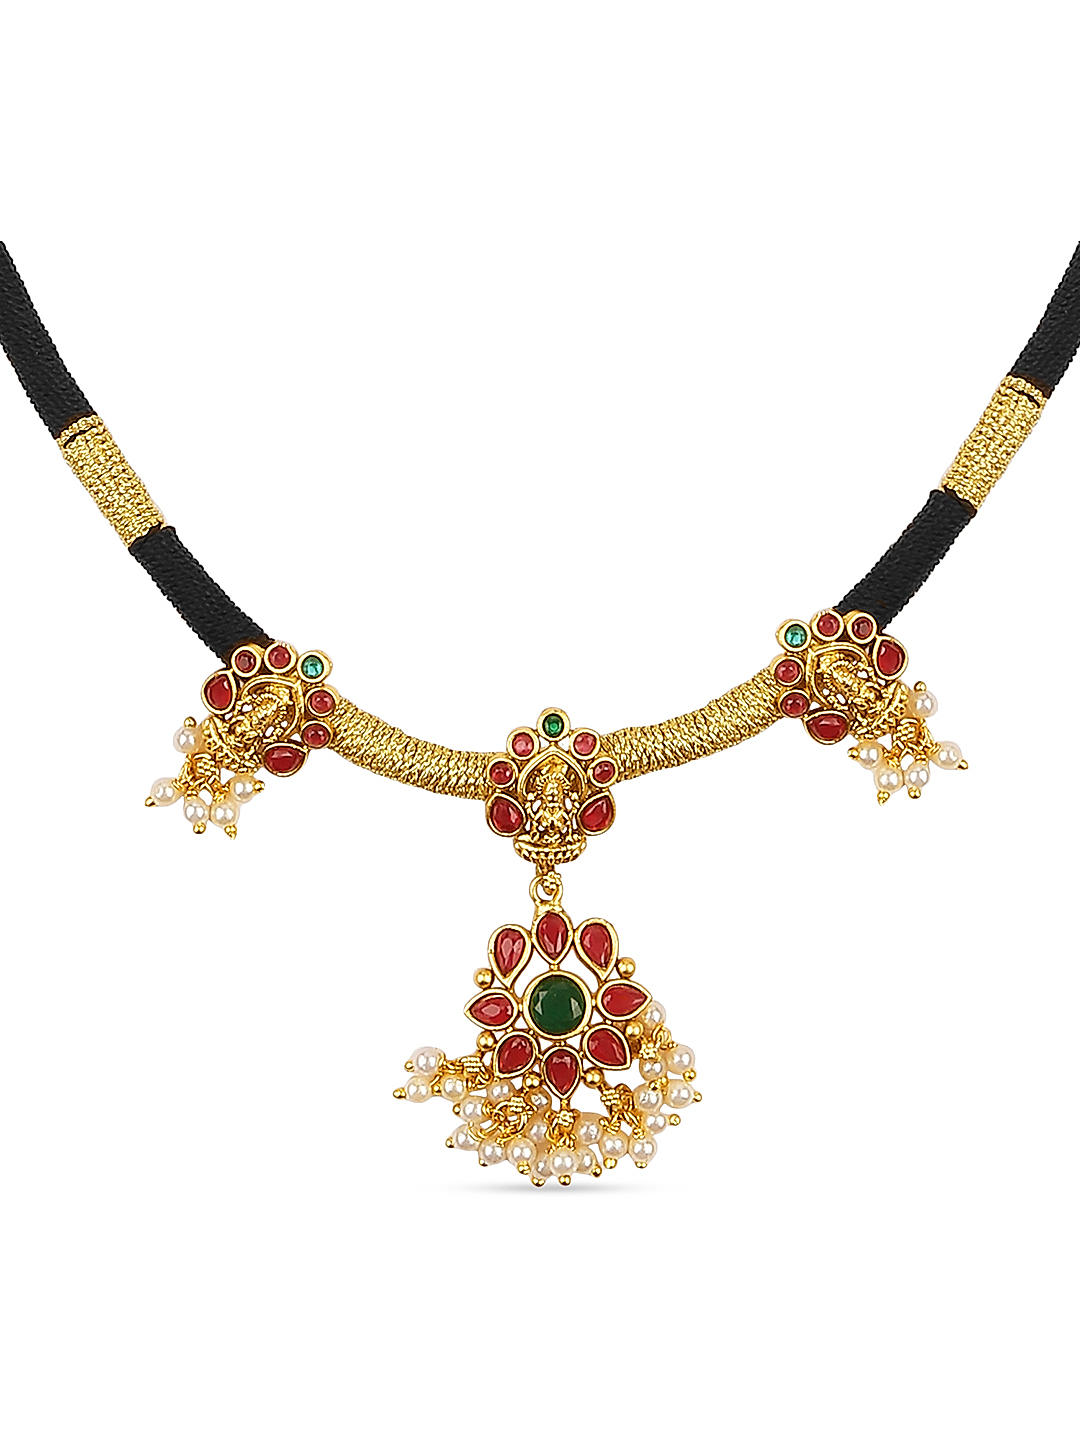 Buy Fida Wedding Ethnic Gold Plated Red and Green stone Pearl Black Cord  Necklace Jewelry Set (Onesize) Online